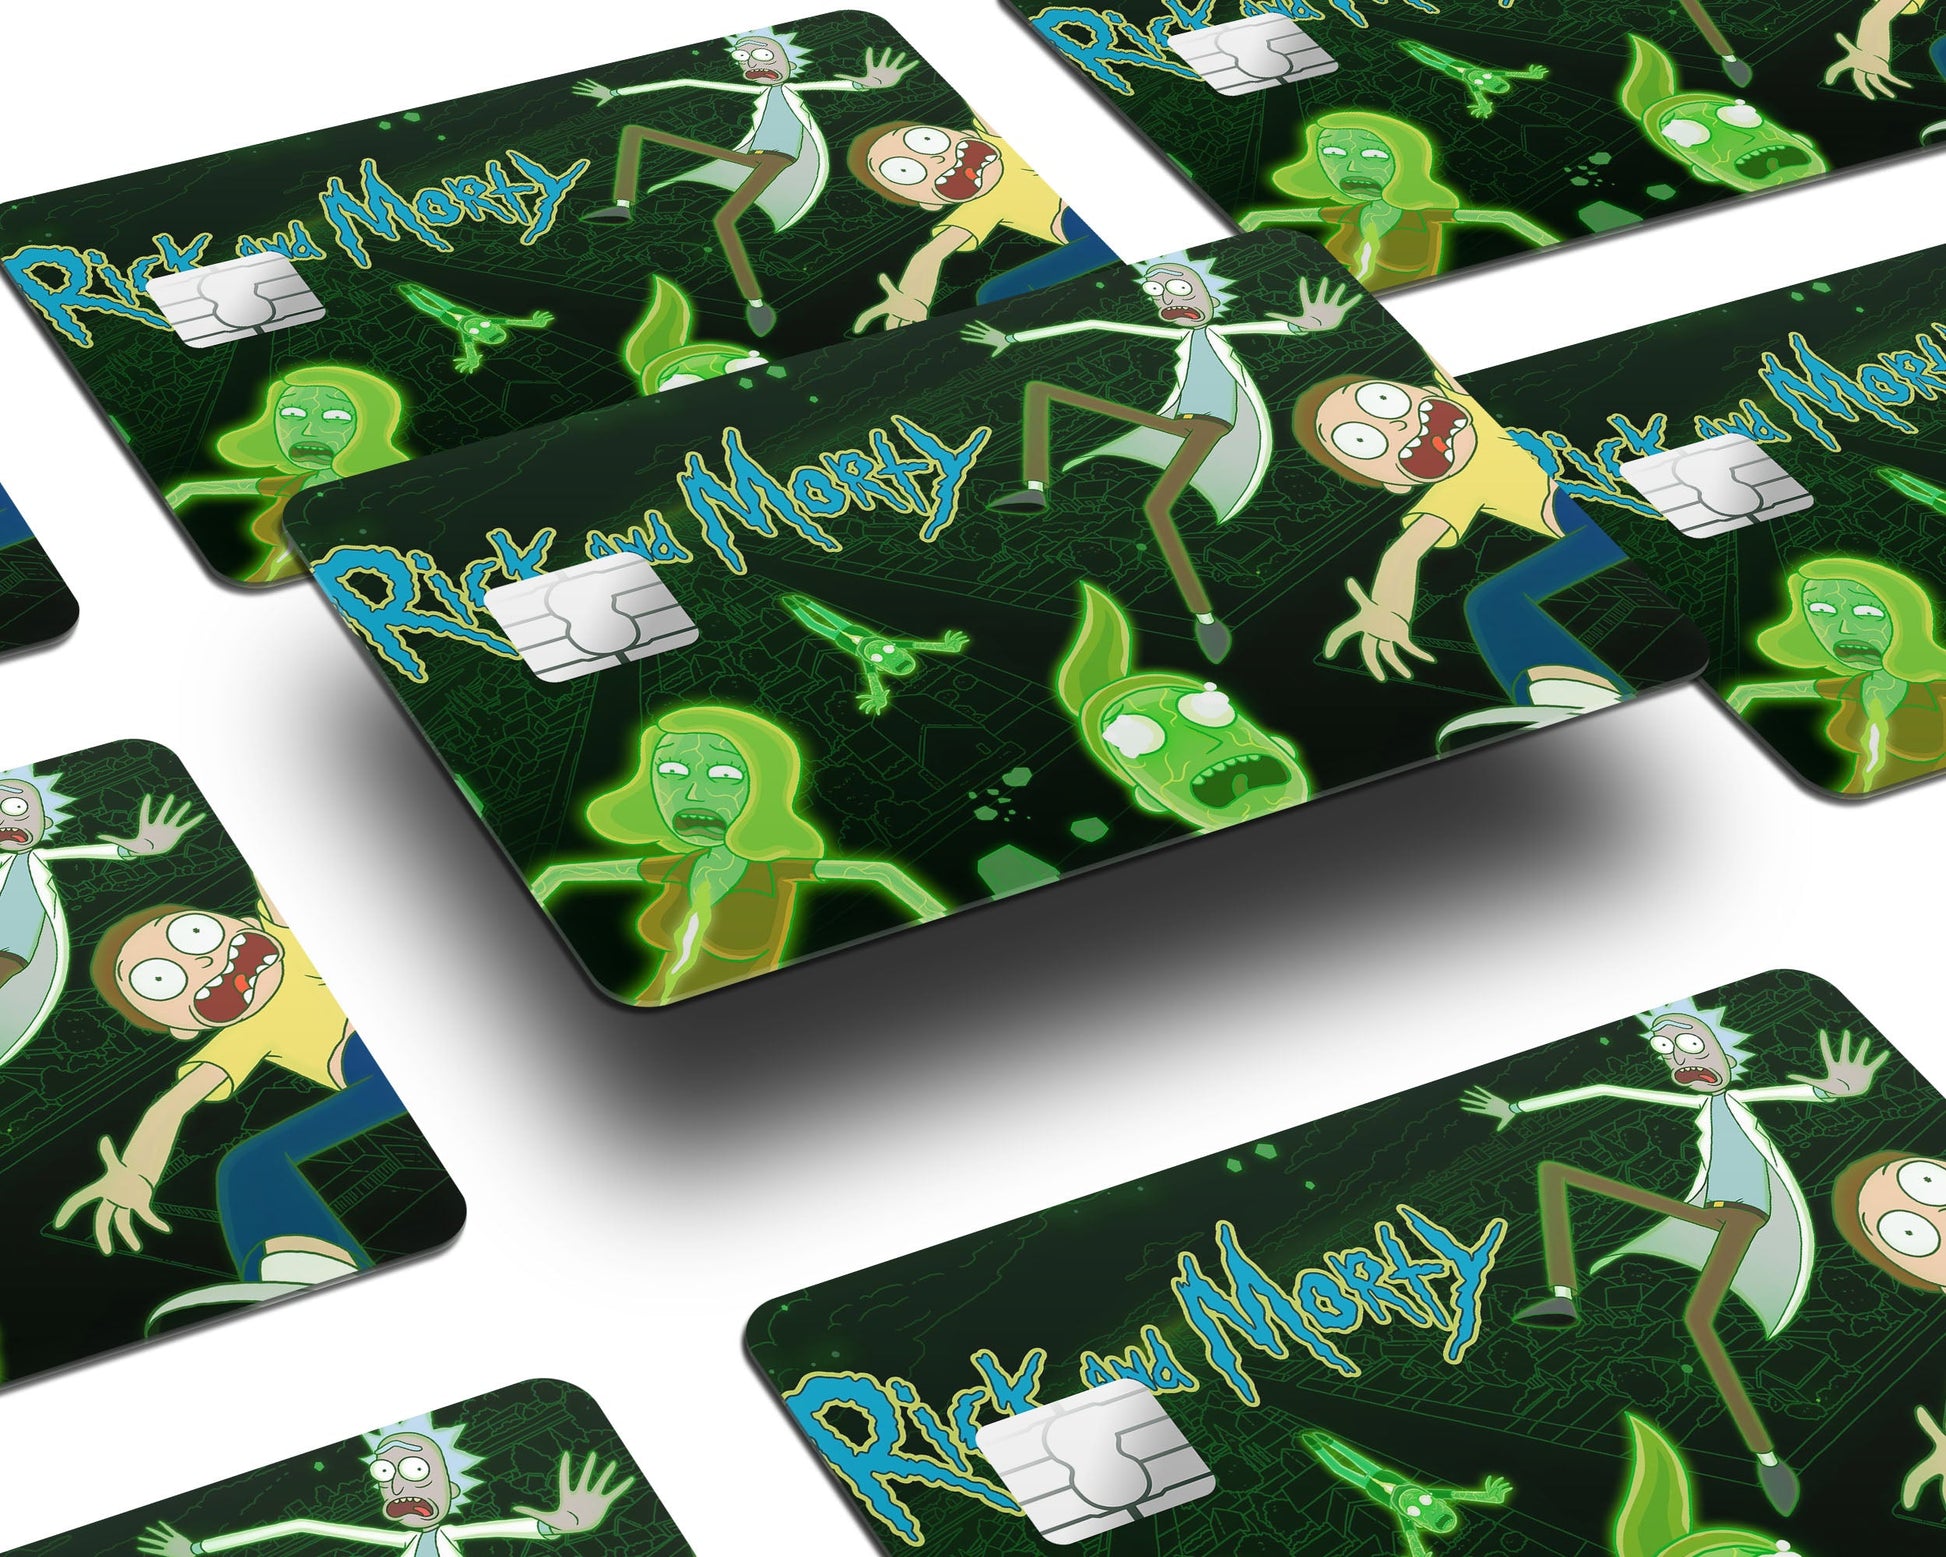 Anime Town Creations Credit Card Rick and Morty Intro Window Skins - Anime Rick and Morty Credit Card Skin